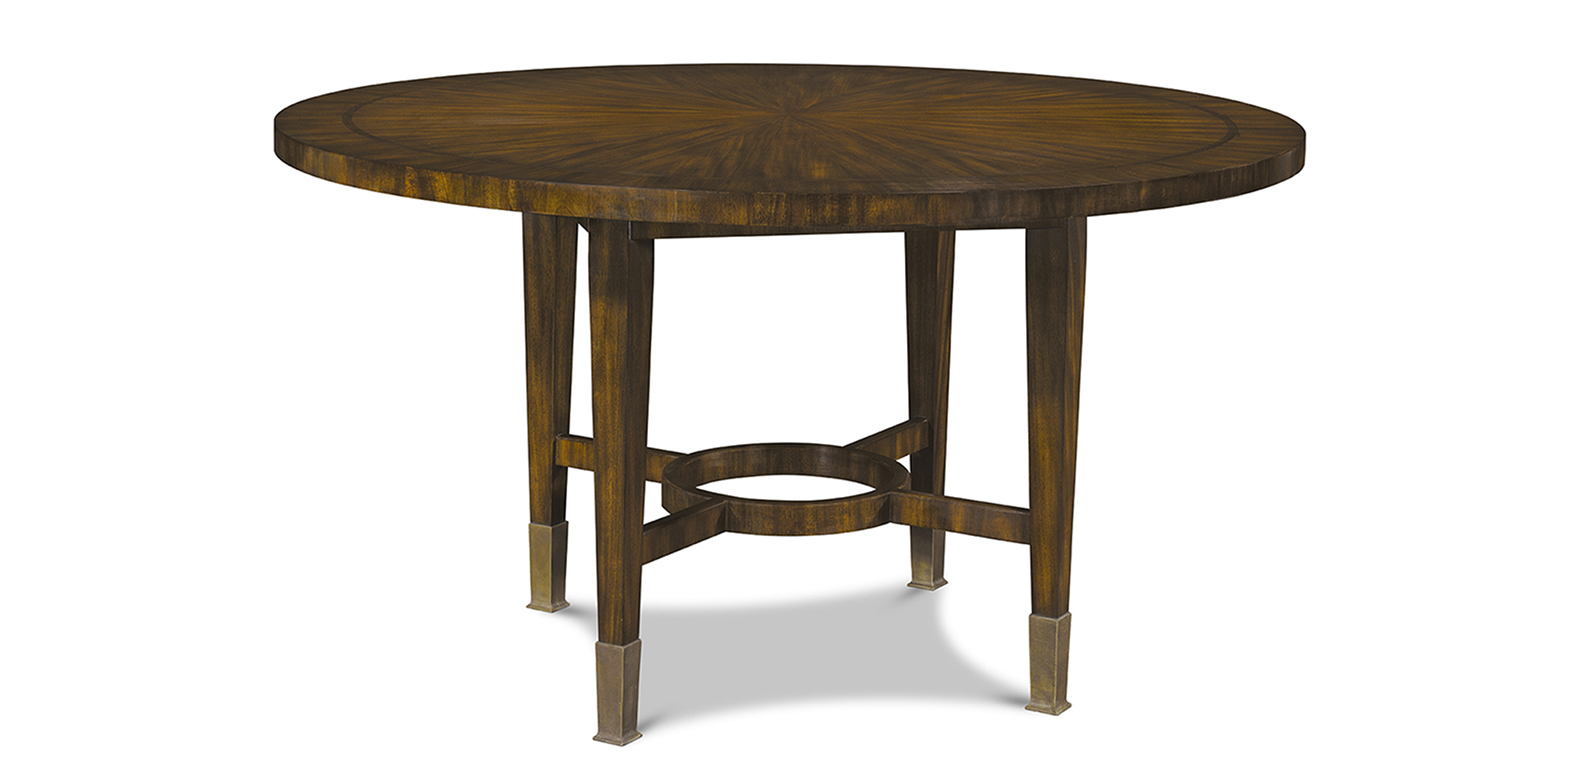 ARGUEIL II DINING TABLE 180